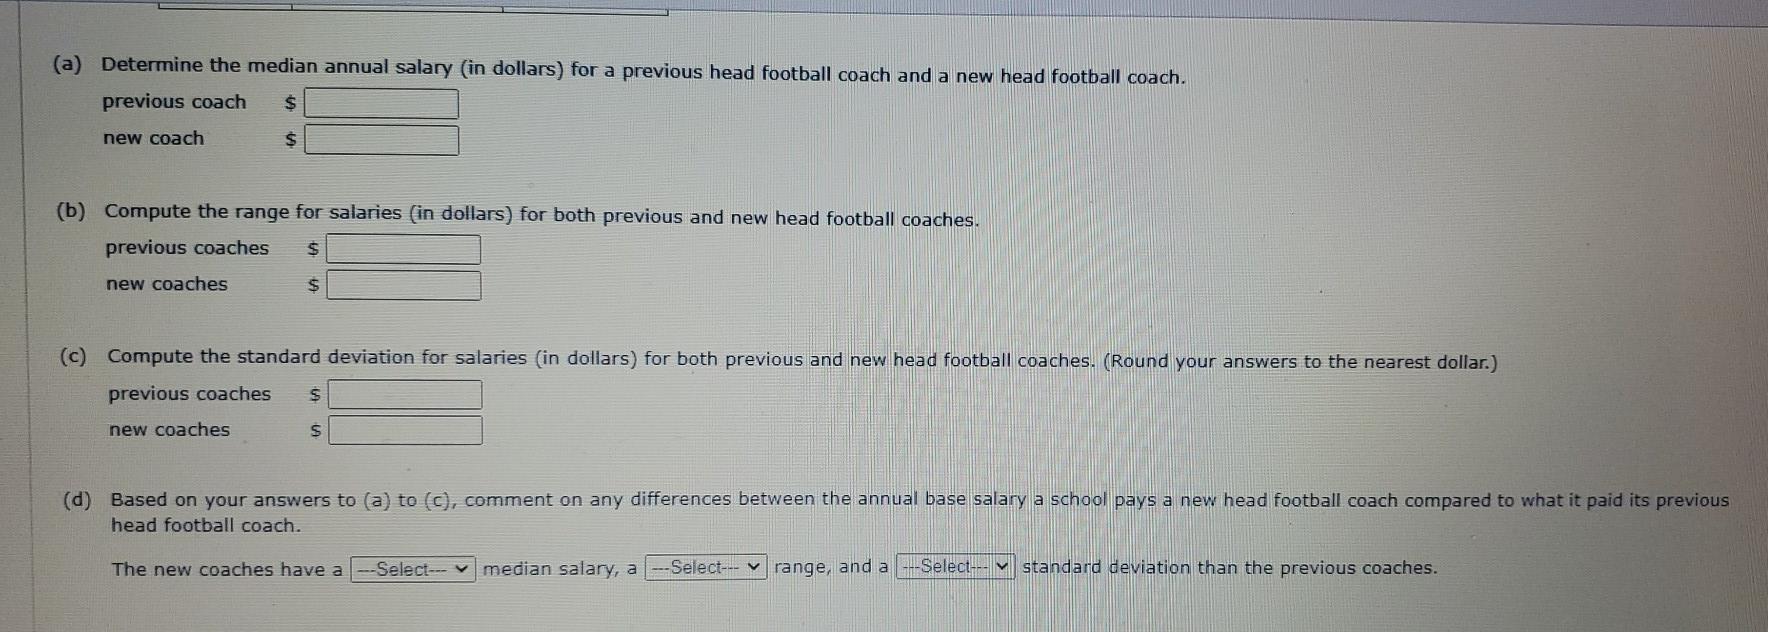 Practice Another A Newspaper Reports That College Football Coaches Salaries Have Continued To Increase In Recent Years 2